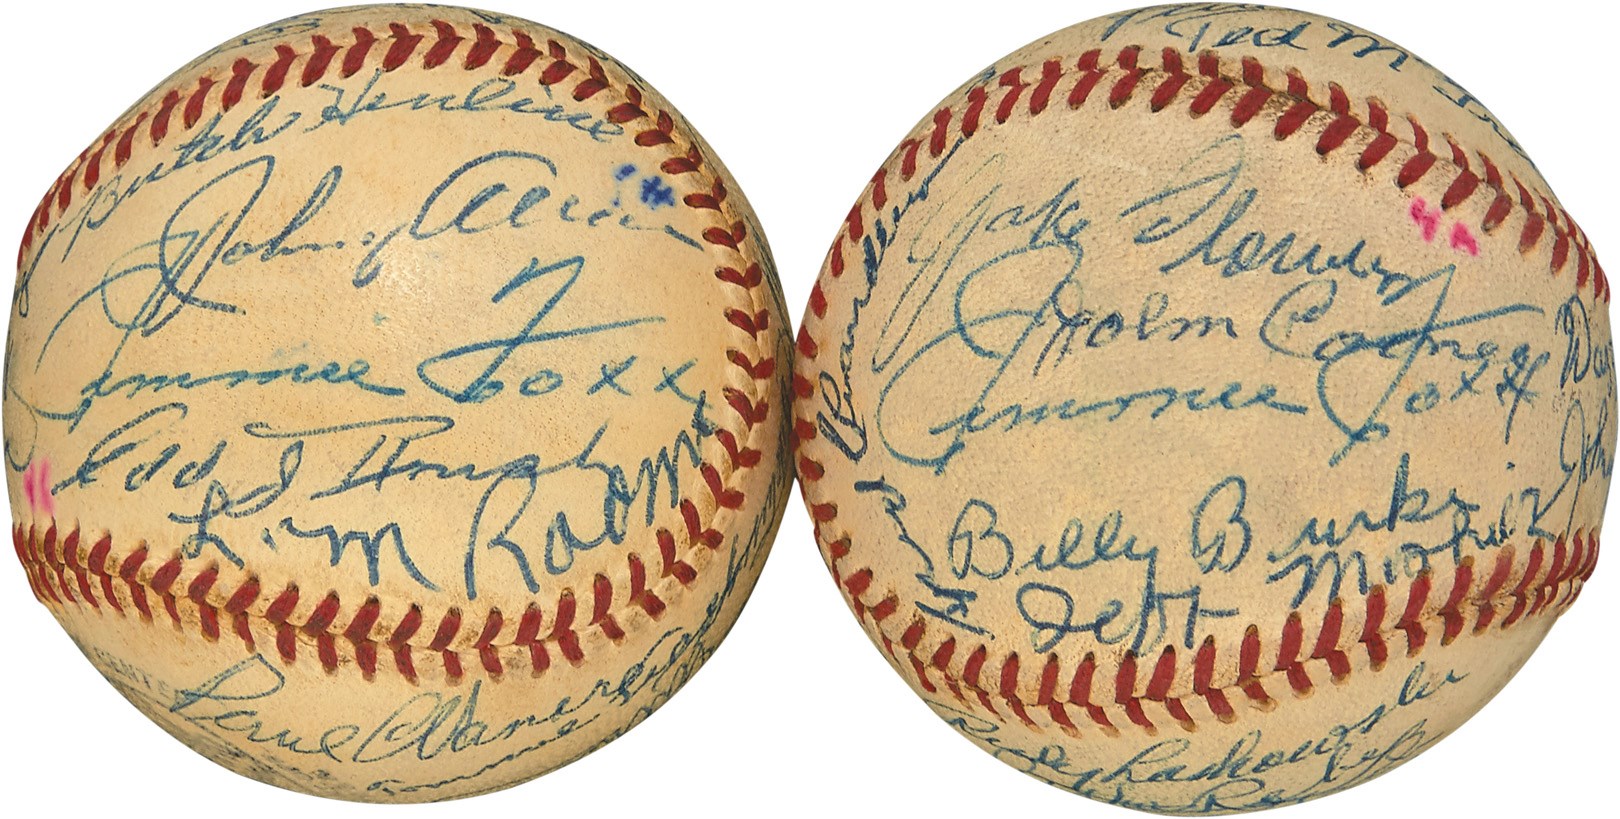 1956 Old Timer's Day Heavily Signed Baseball Pair w/Jimmie Foxx (PSA)